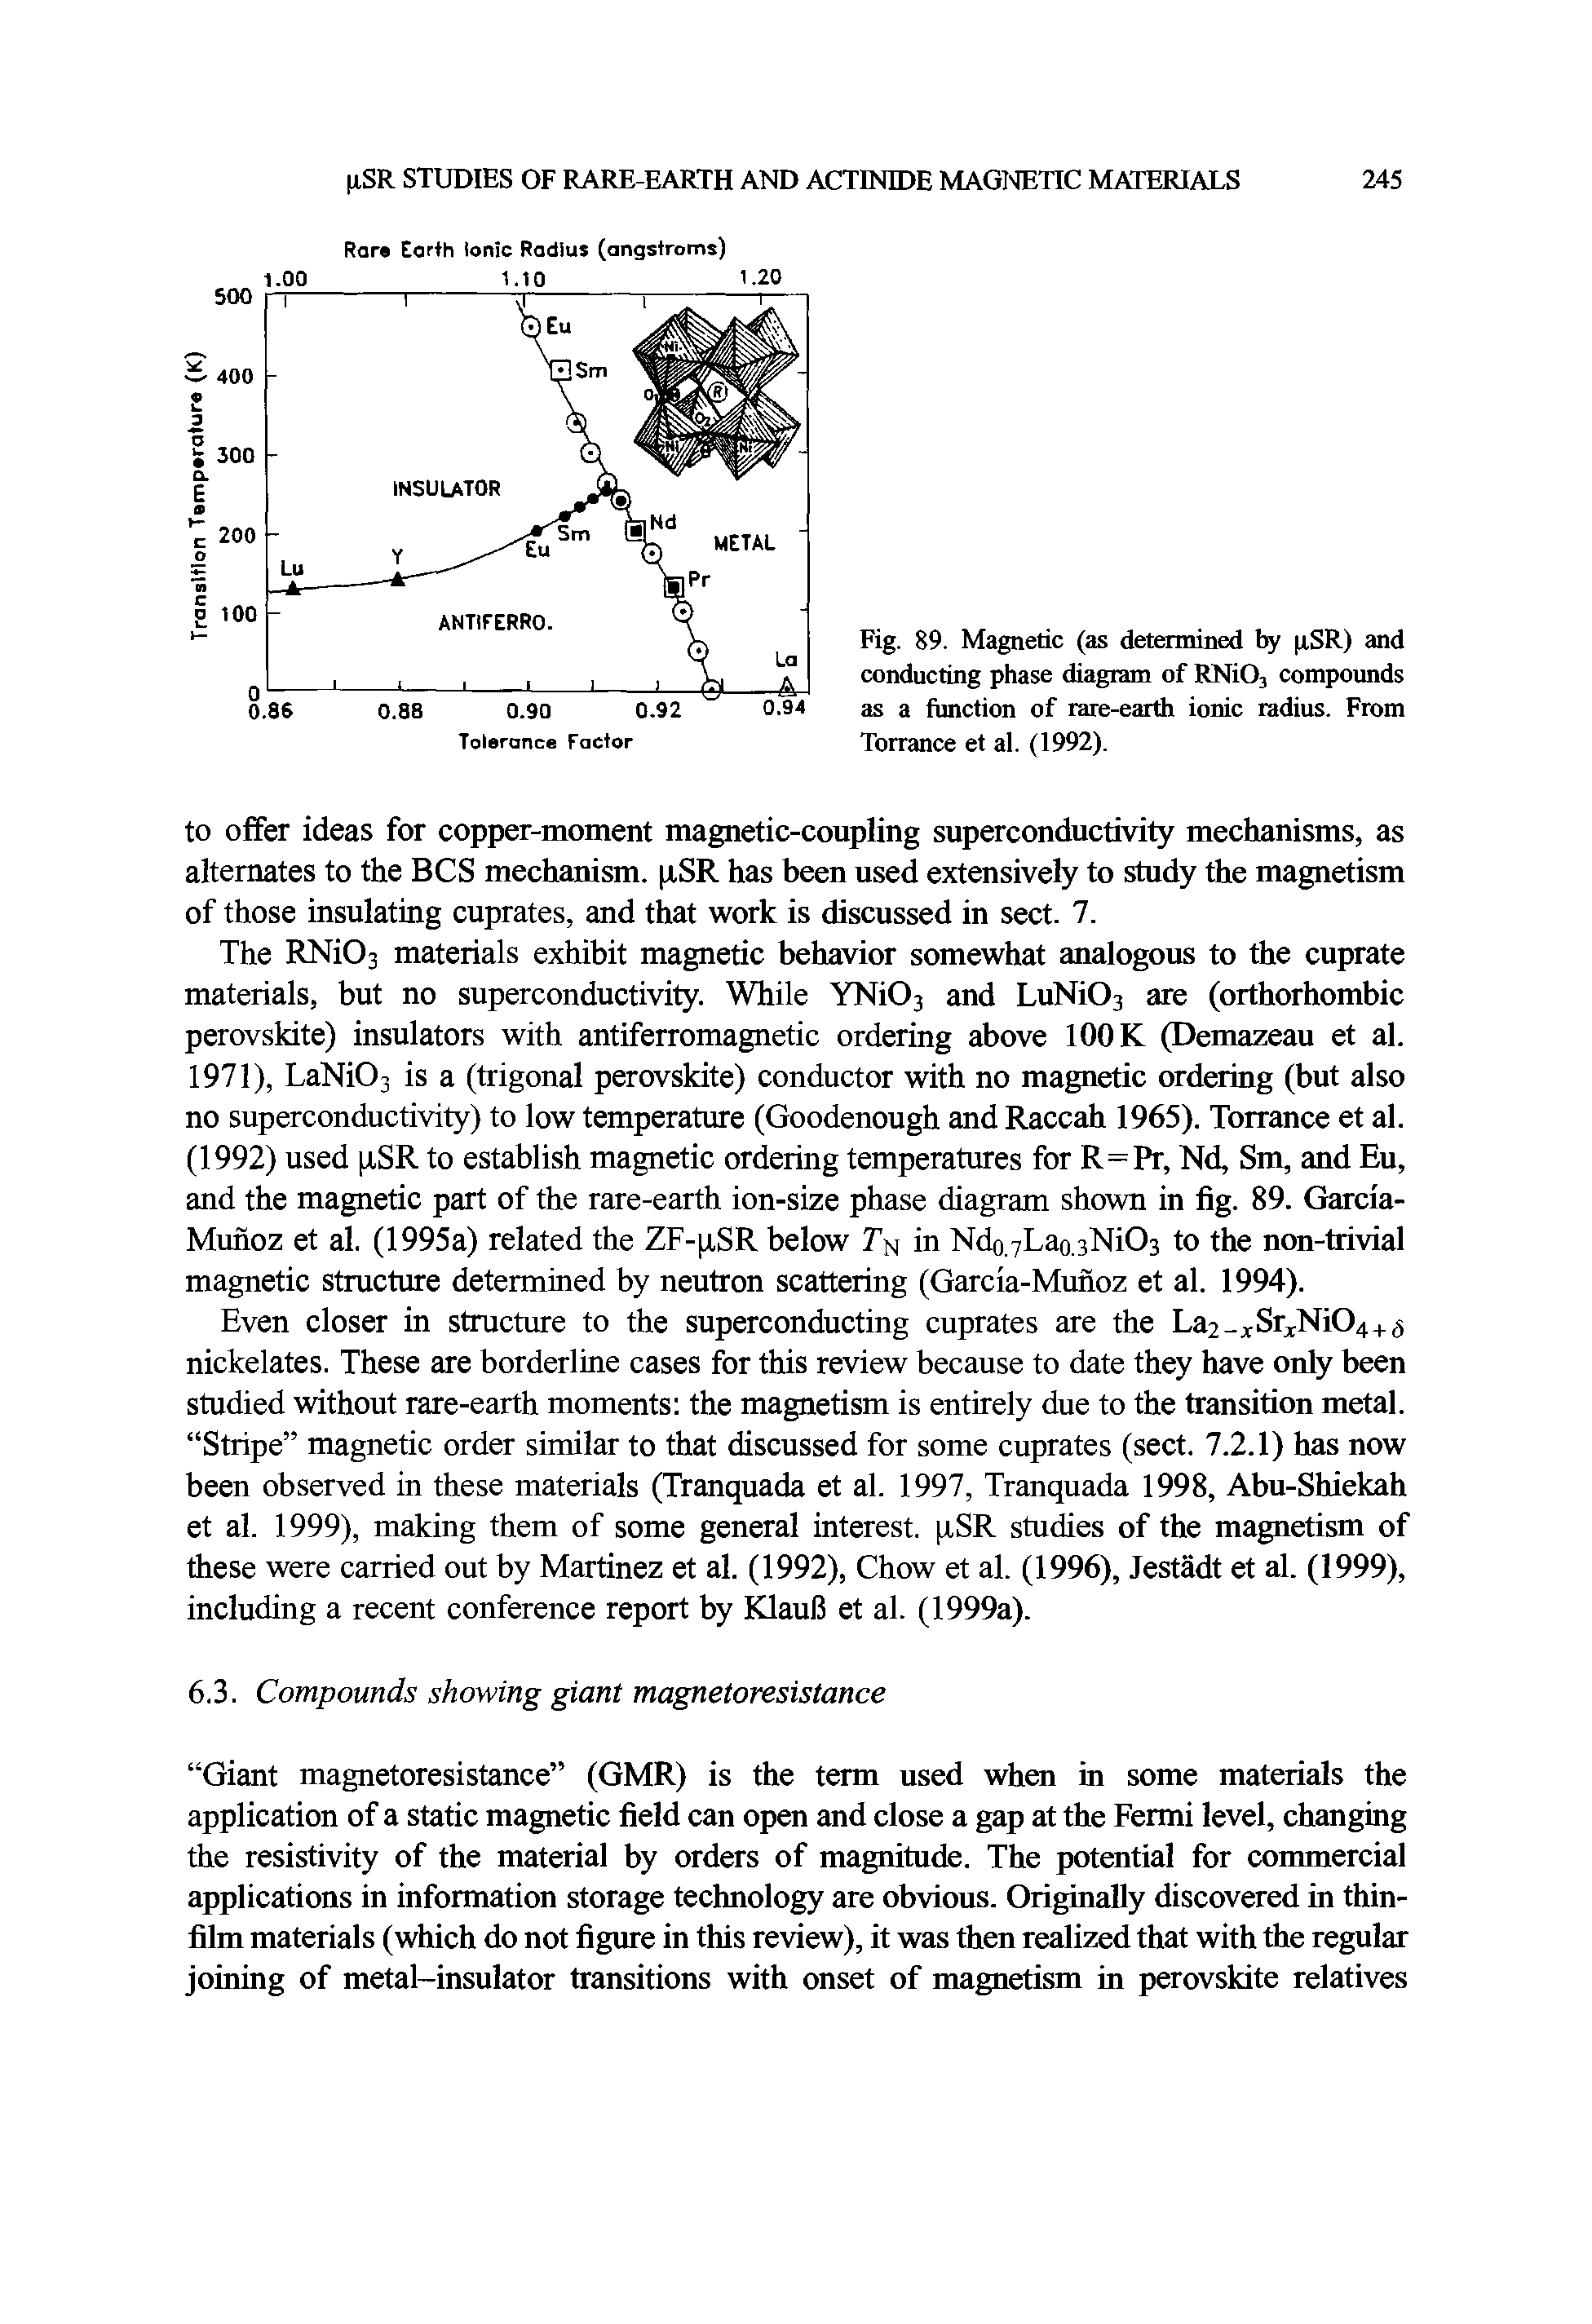 Fig. 89. Magnetic (as determined by ilSR) and conducting phase diagram of RNiO, compoimds as a function of rare-earth ionic radius. From Torrance et al. (1992).